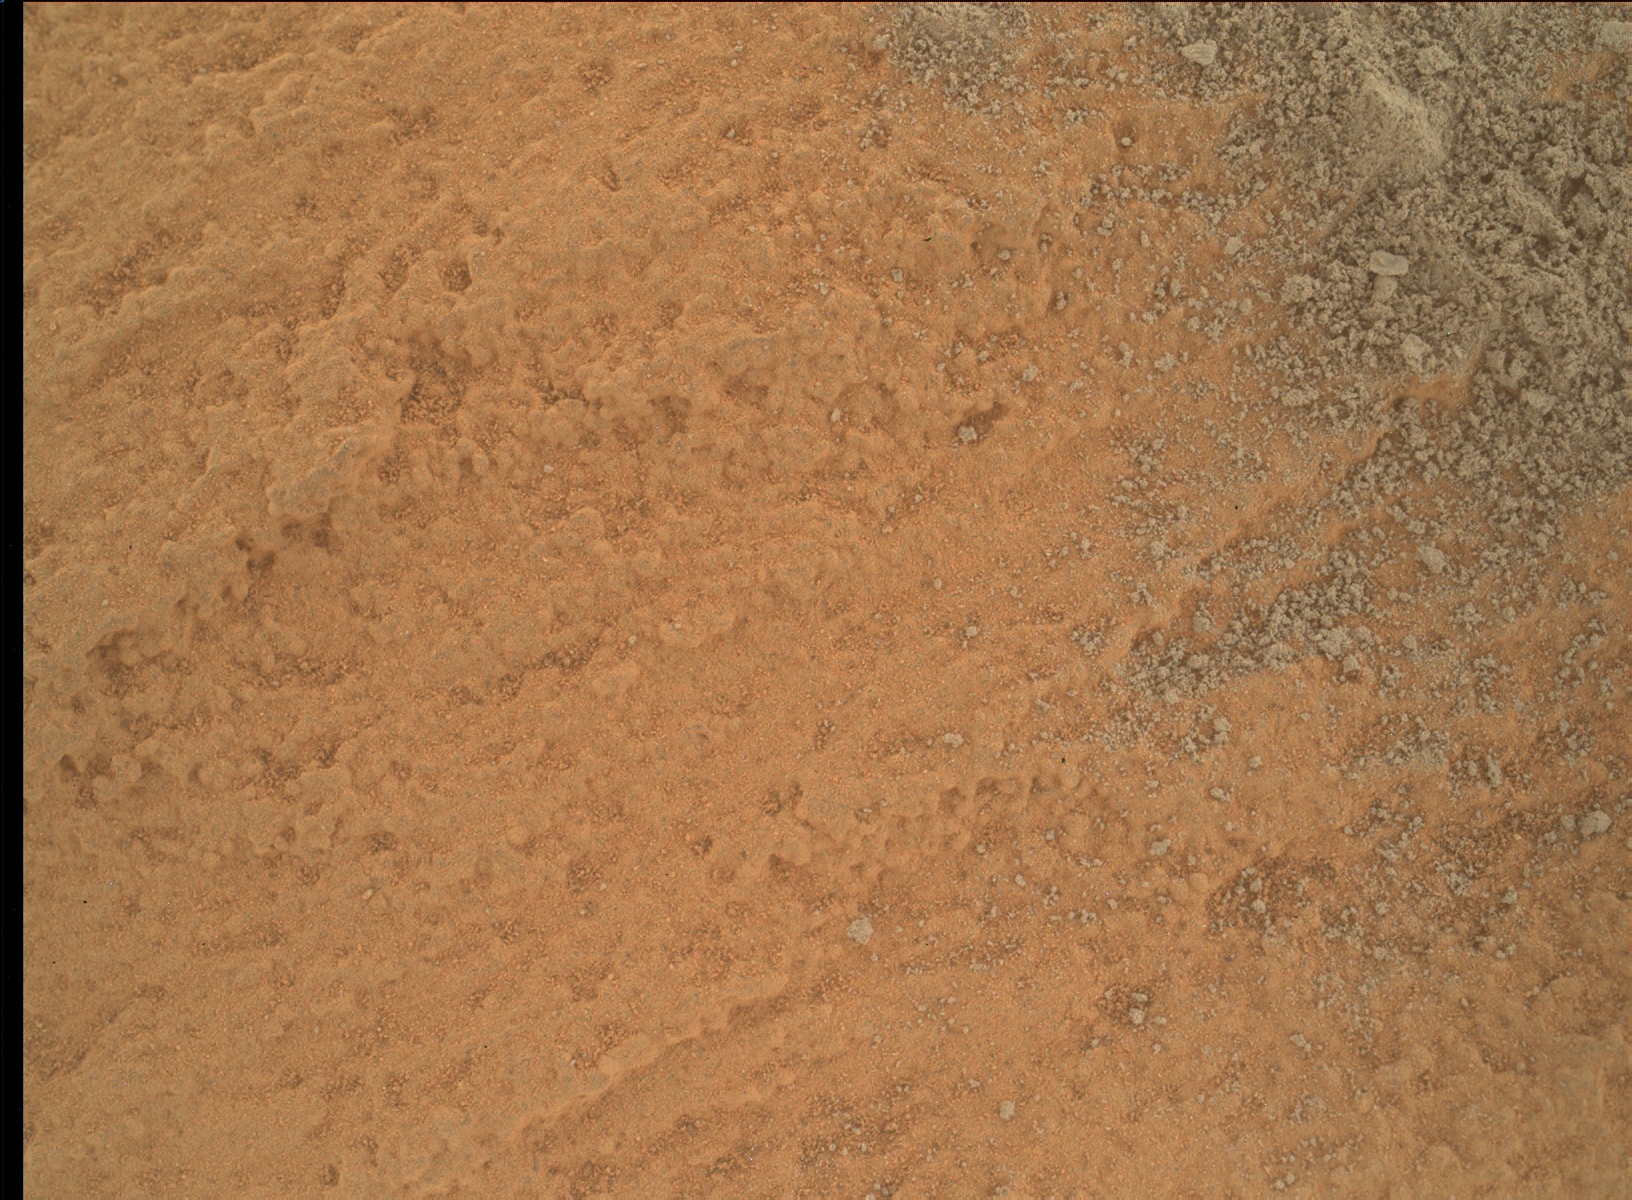 Nasa's Mars rover Curiosity acquired this image using its Mars Hand Lens Imager (MAHLI) on Sol 2725